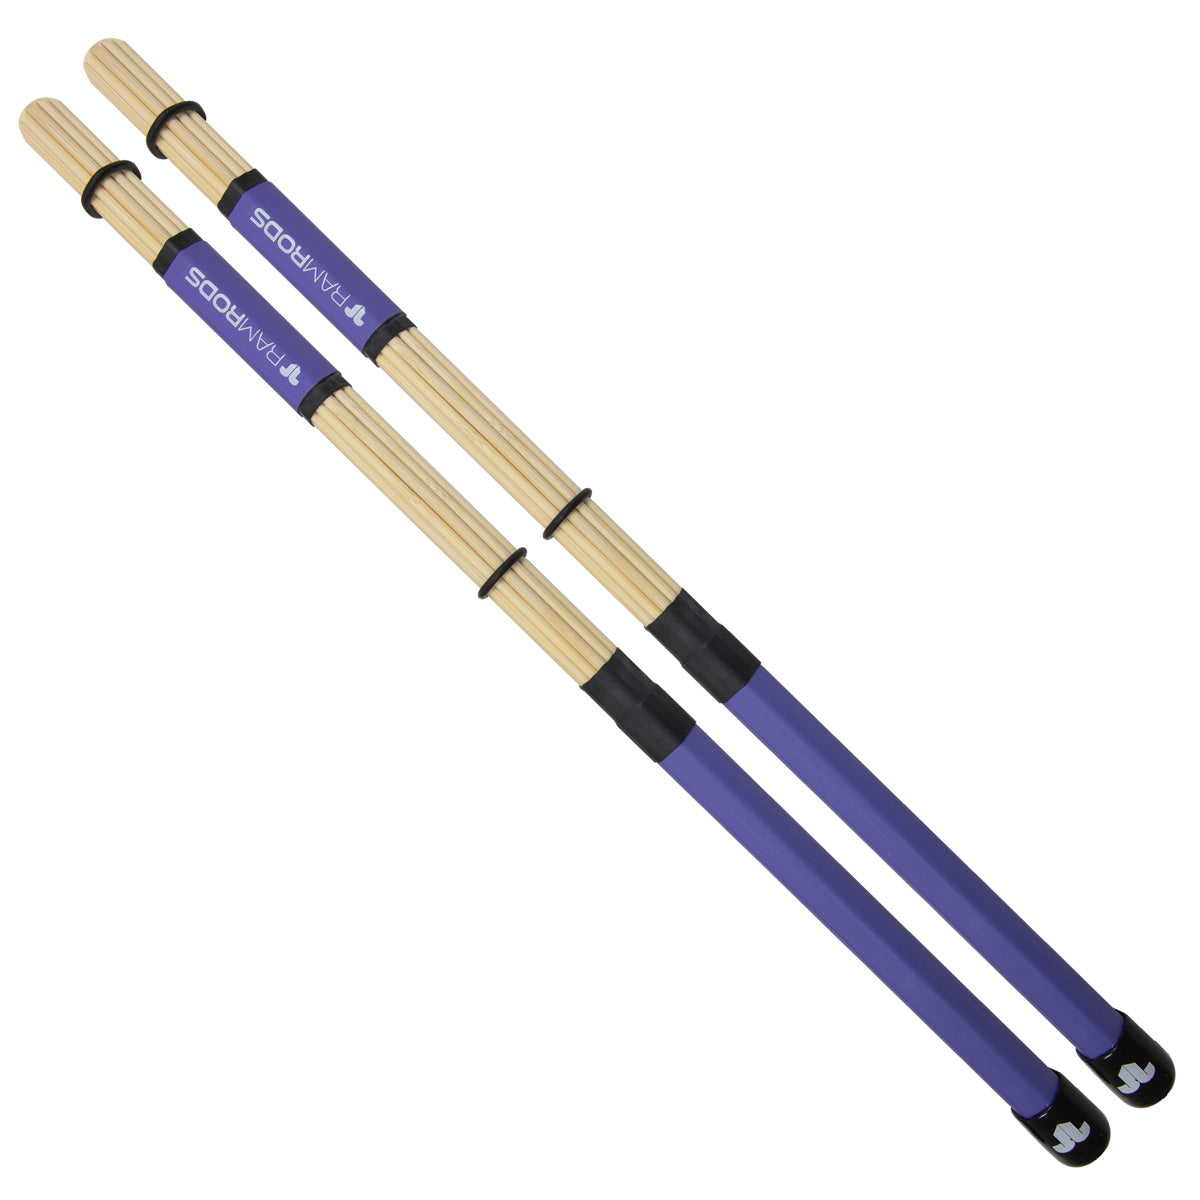 RamRods Classic Bamboo Rods